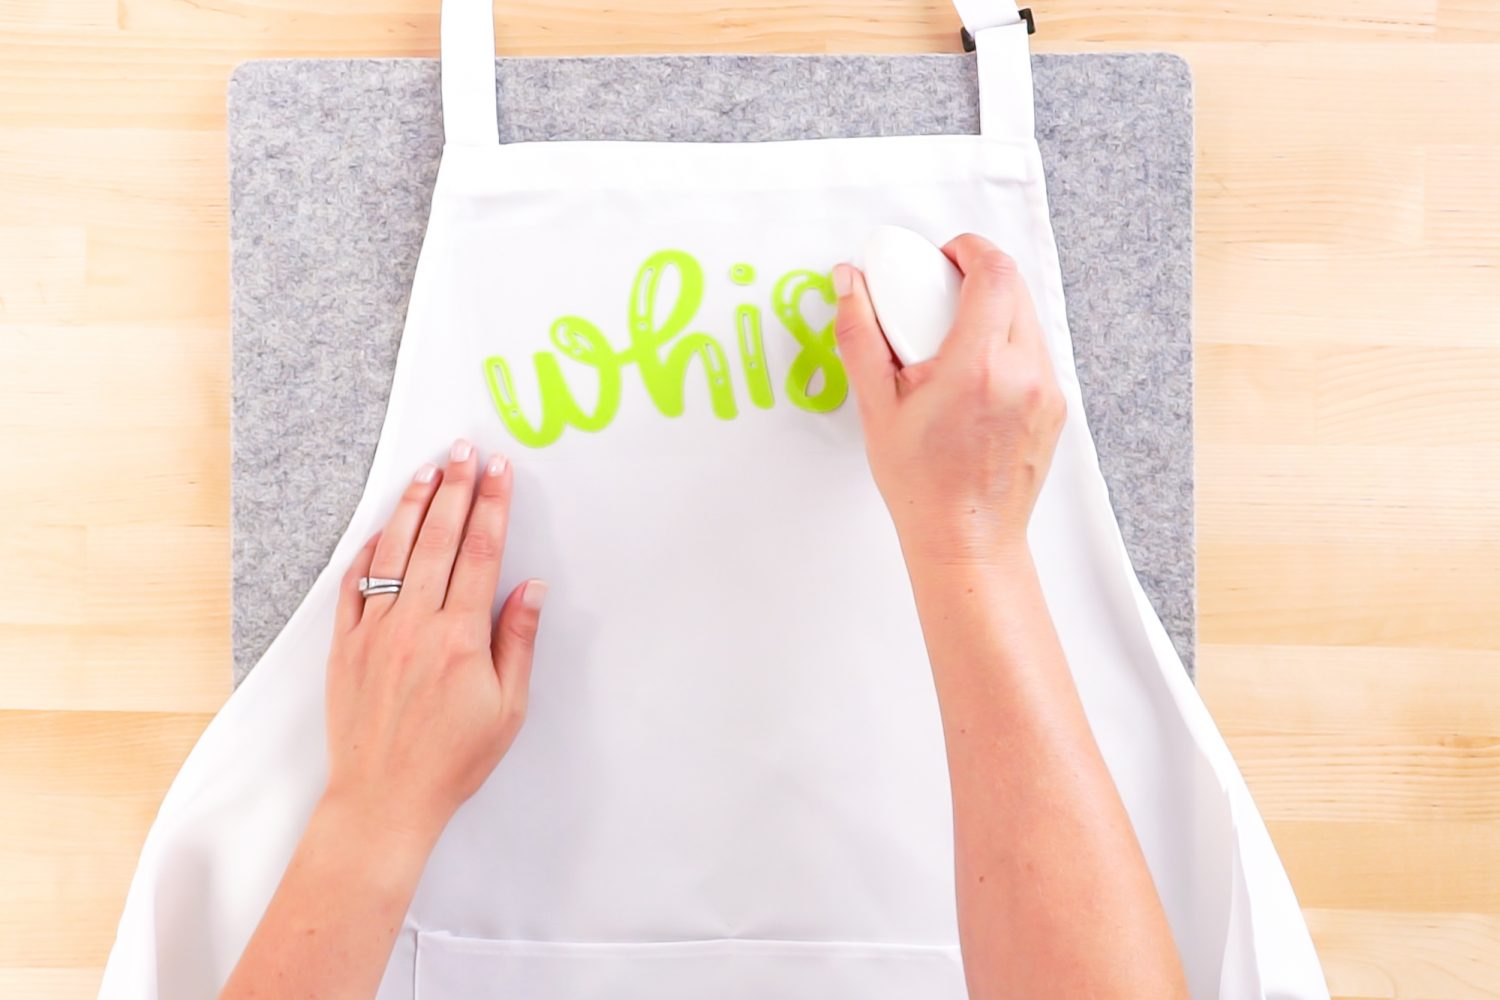 Iron the first layer onto your apron using the EasyPress Mini.